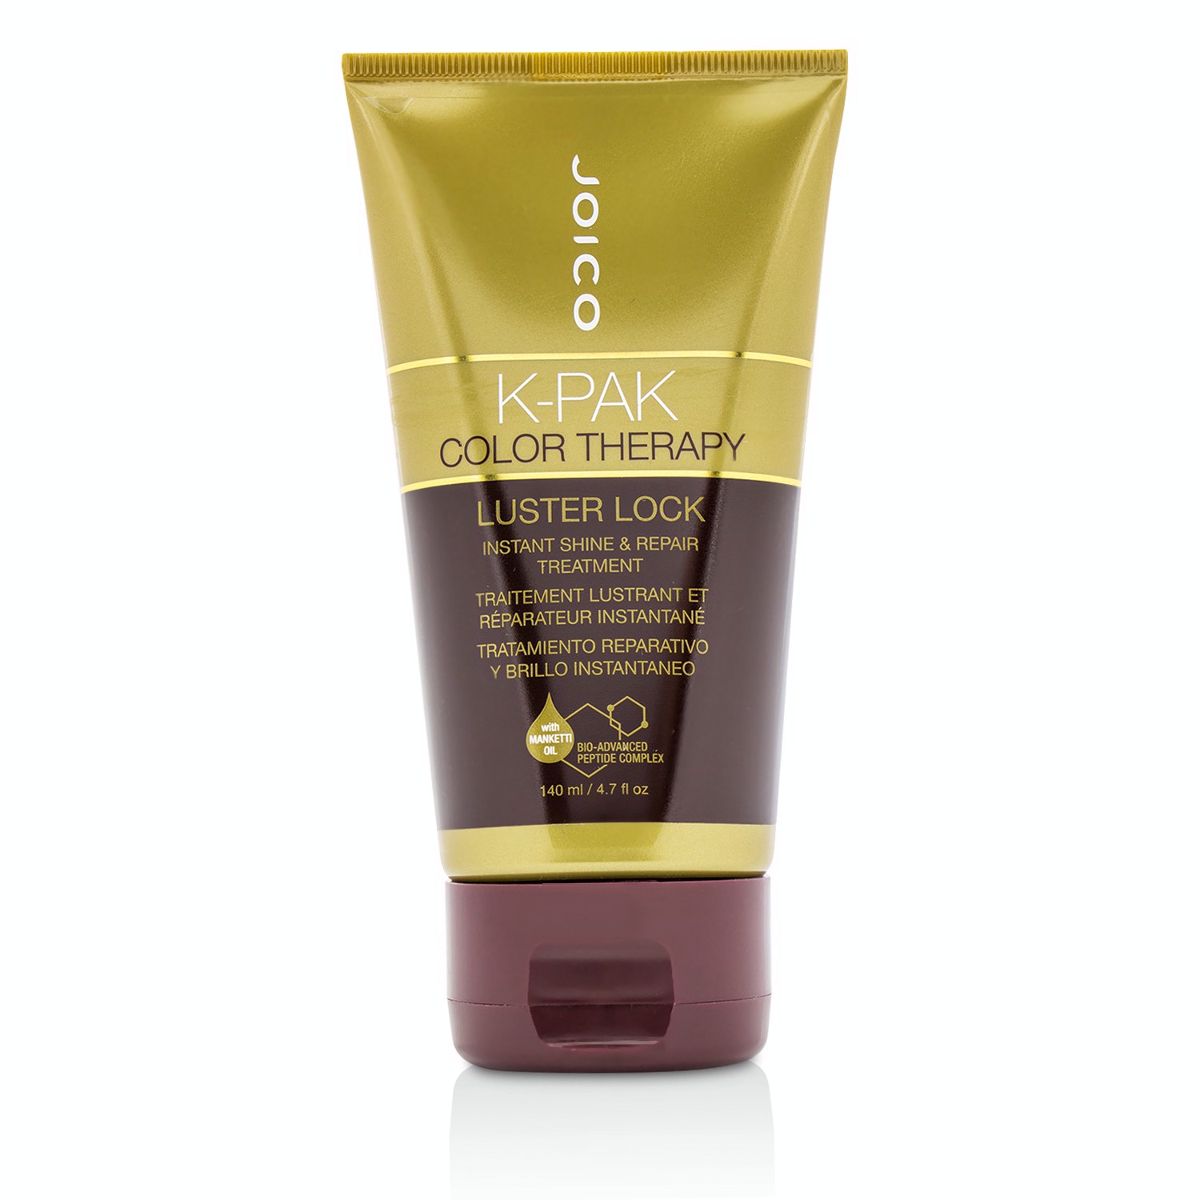 K-Pak Color Therapy Luster Lock Instant Shine  Repair Treatment Joico Image